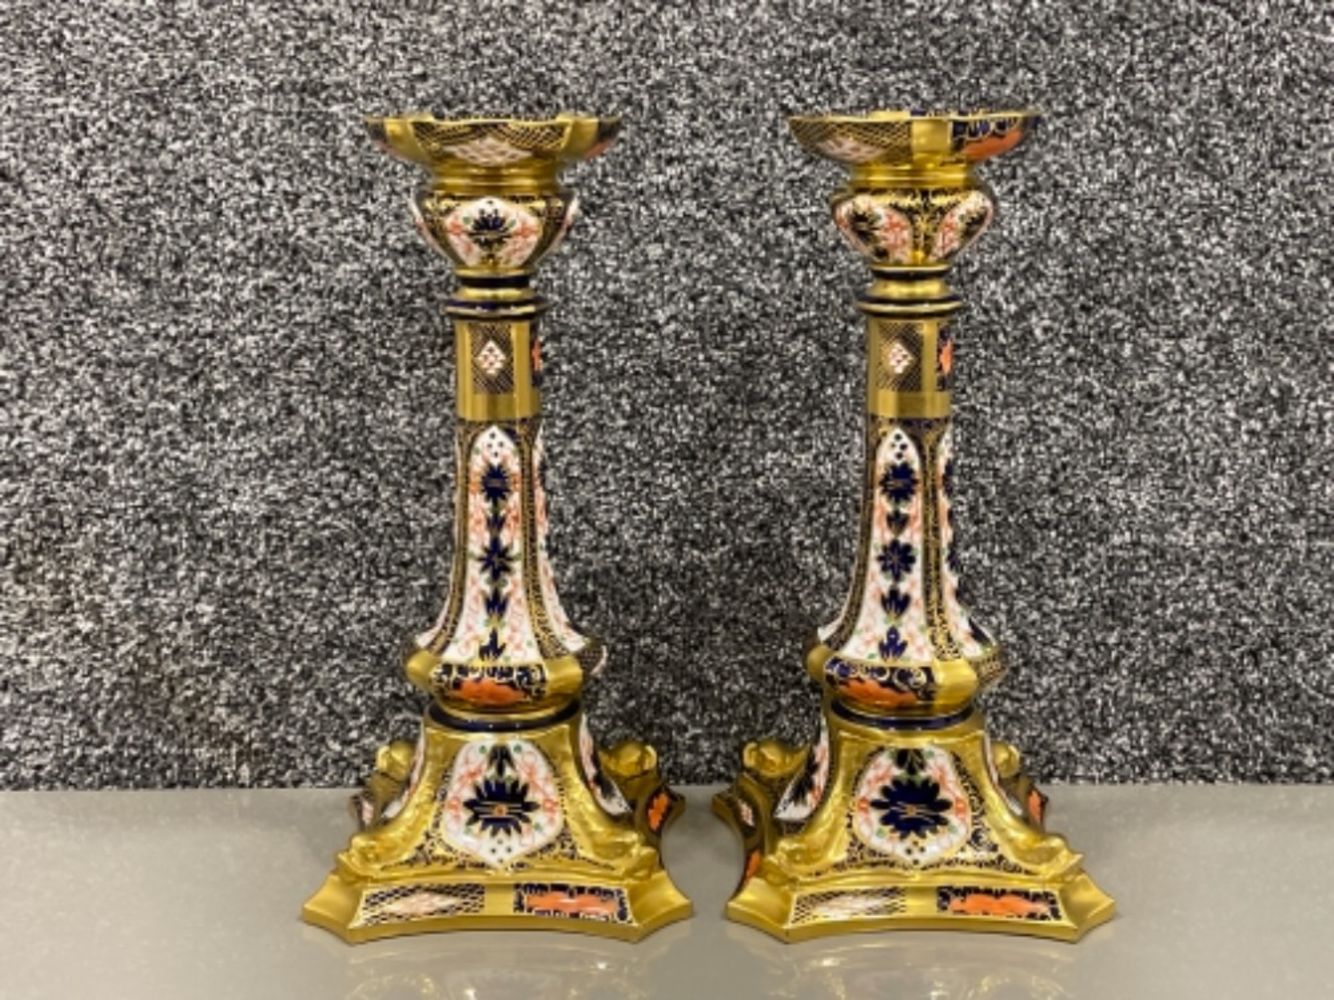 Royal Crown Derby, Jewellery and Watch Auction (No Room Bidding)